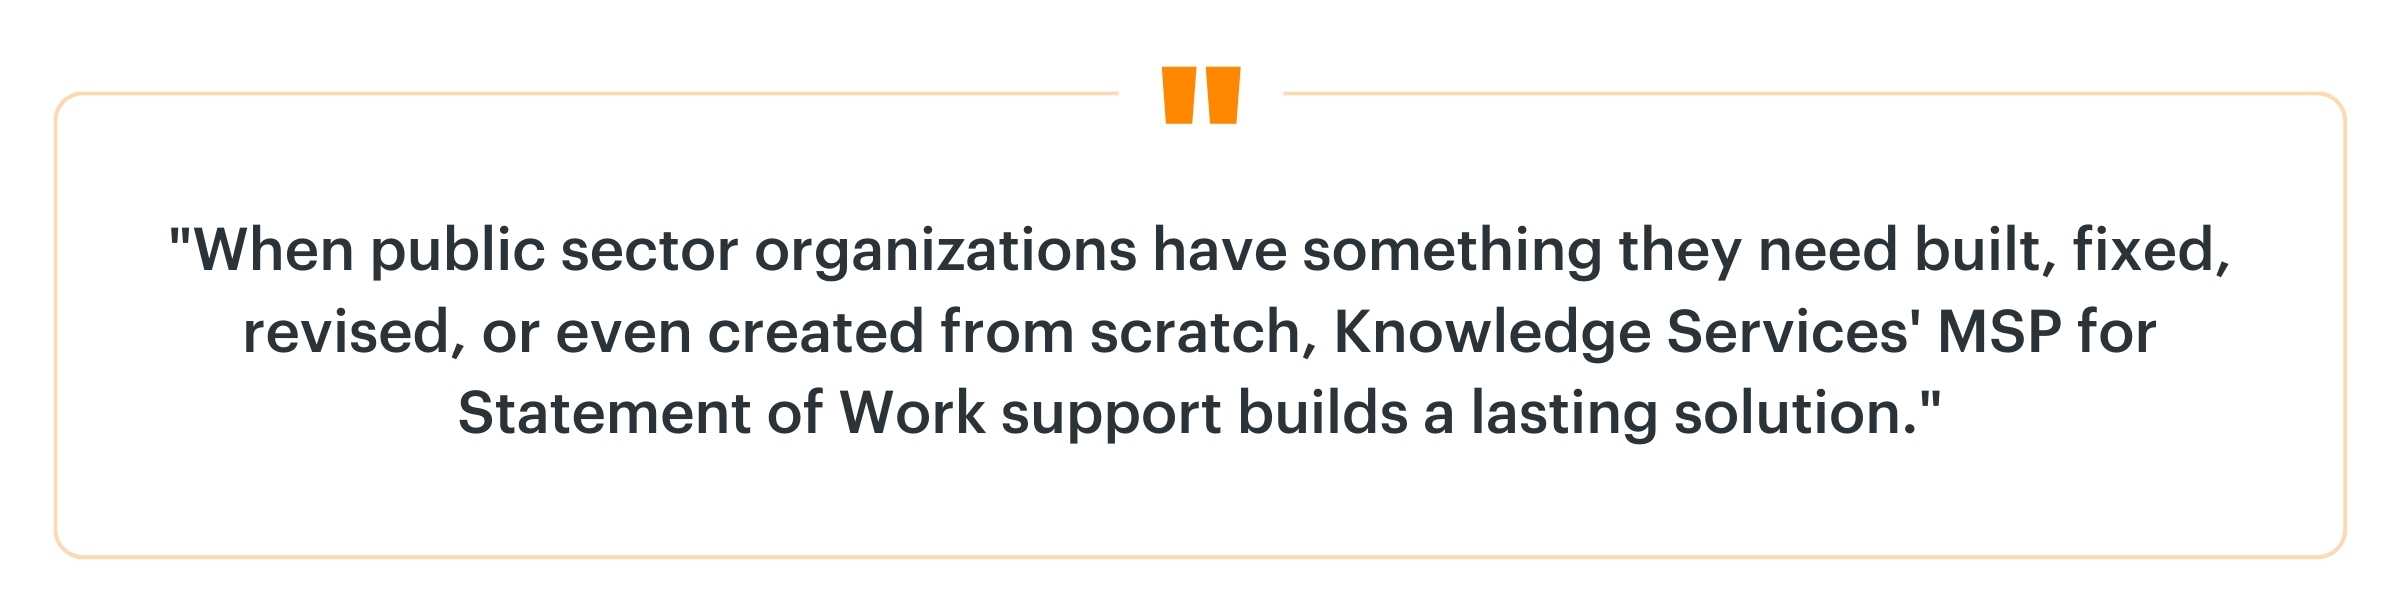 Block quote containing the text: “When public sector organizations have something they need built, fixed, revised, or even created from scratch, Knowledge Services’ MSP for Statement of Work support builds a lasting solution.”